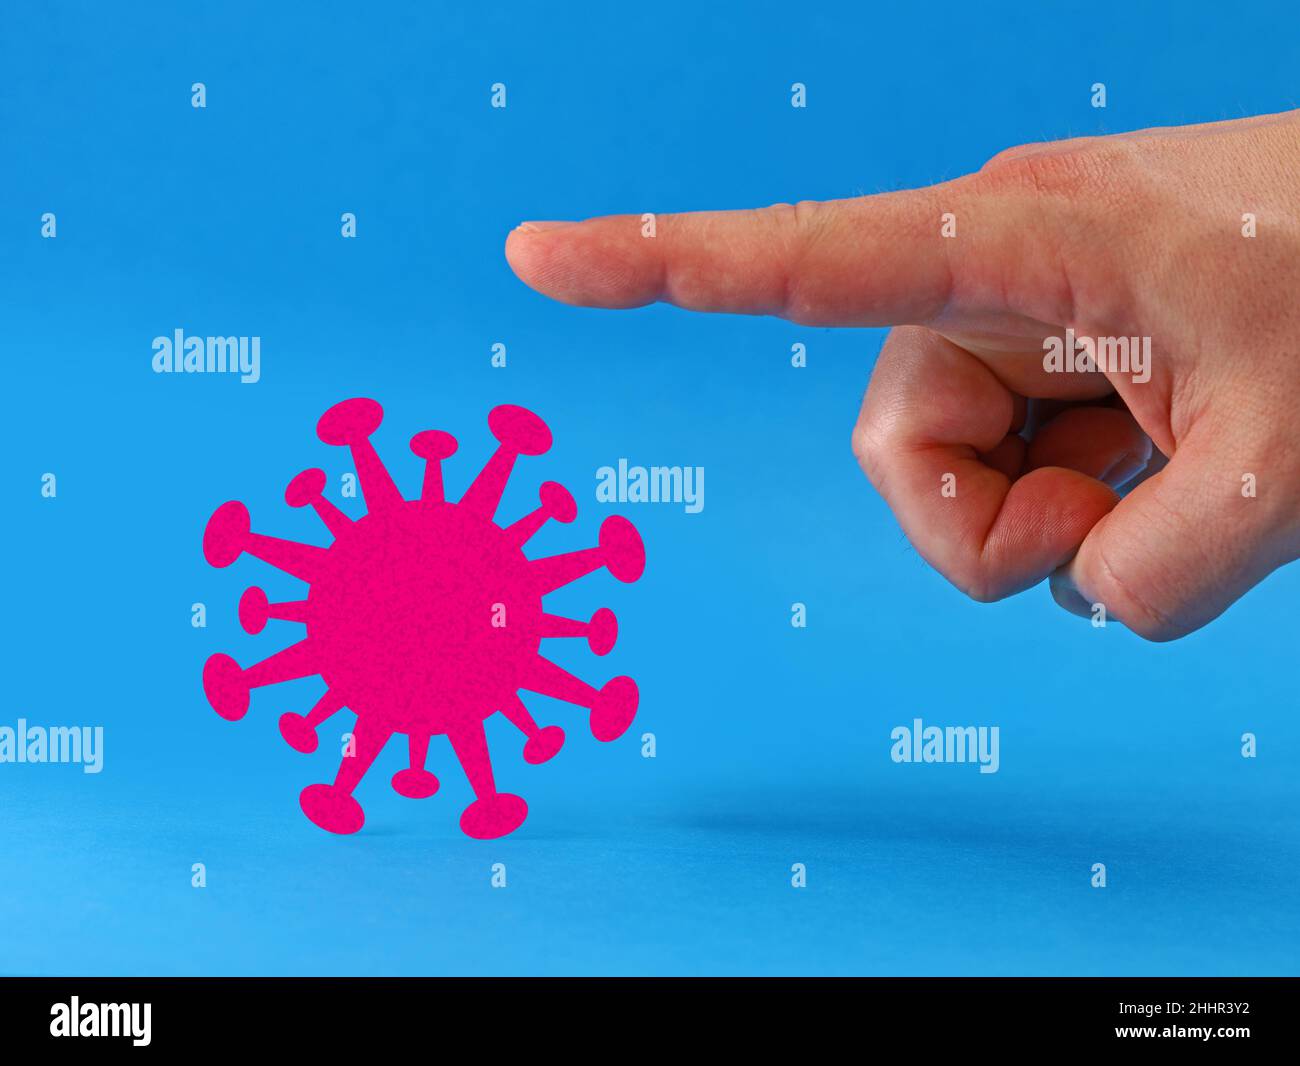 finger shows corona virus the way isolated on blue background, good bye pandemic concept image Stock Photo